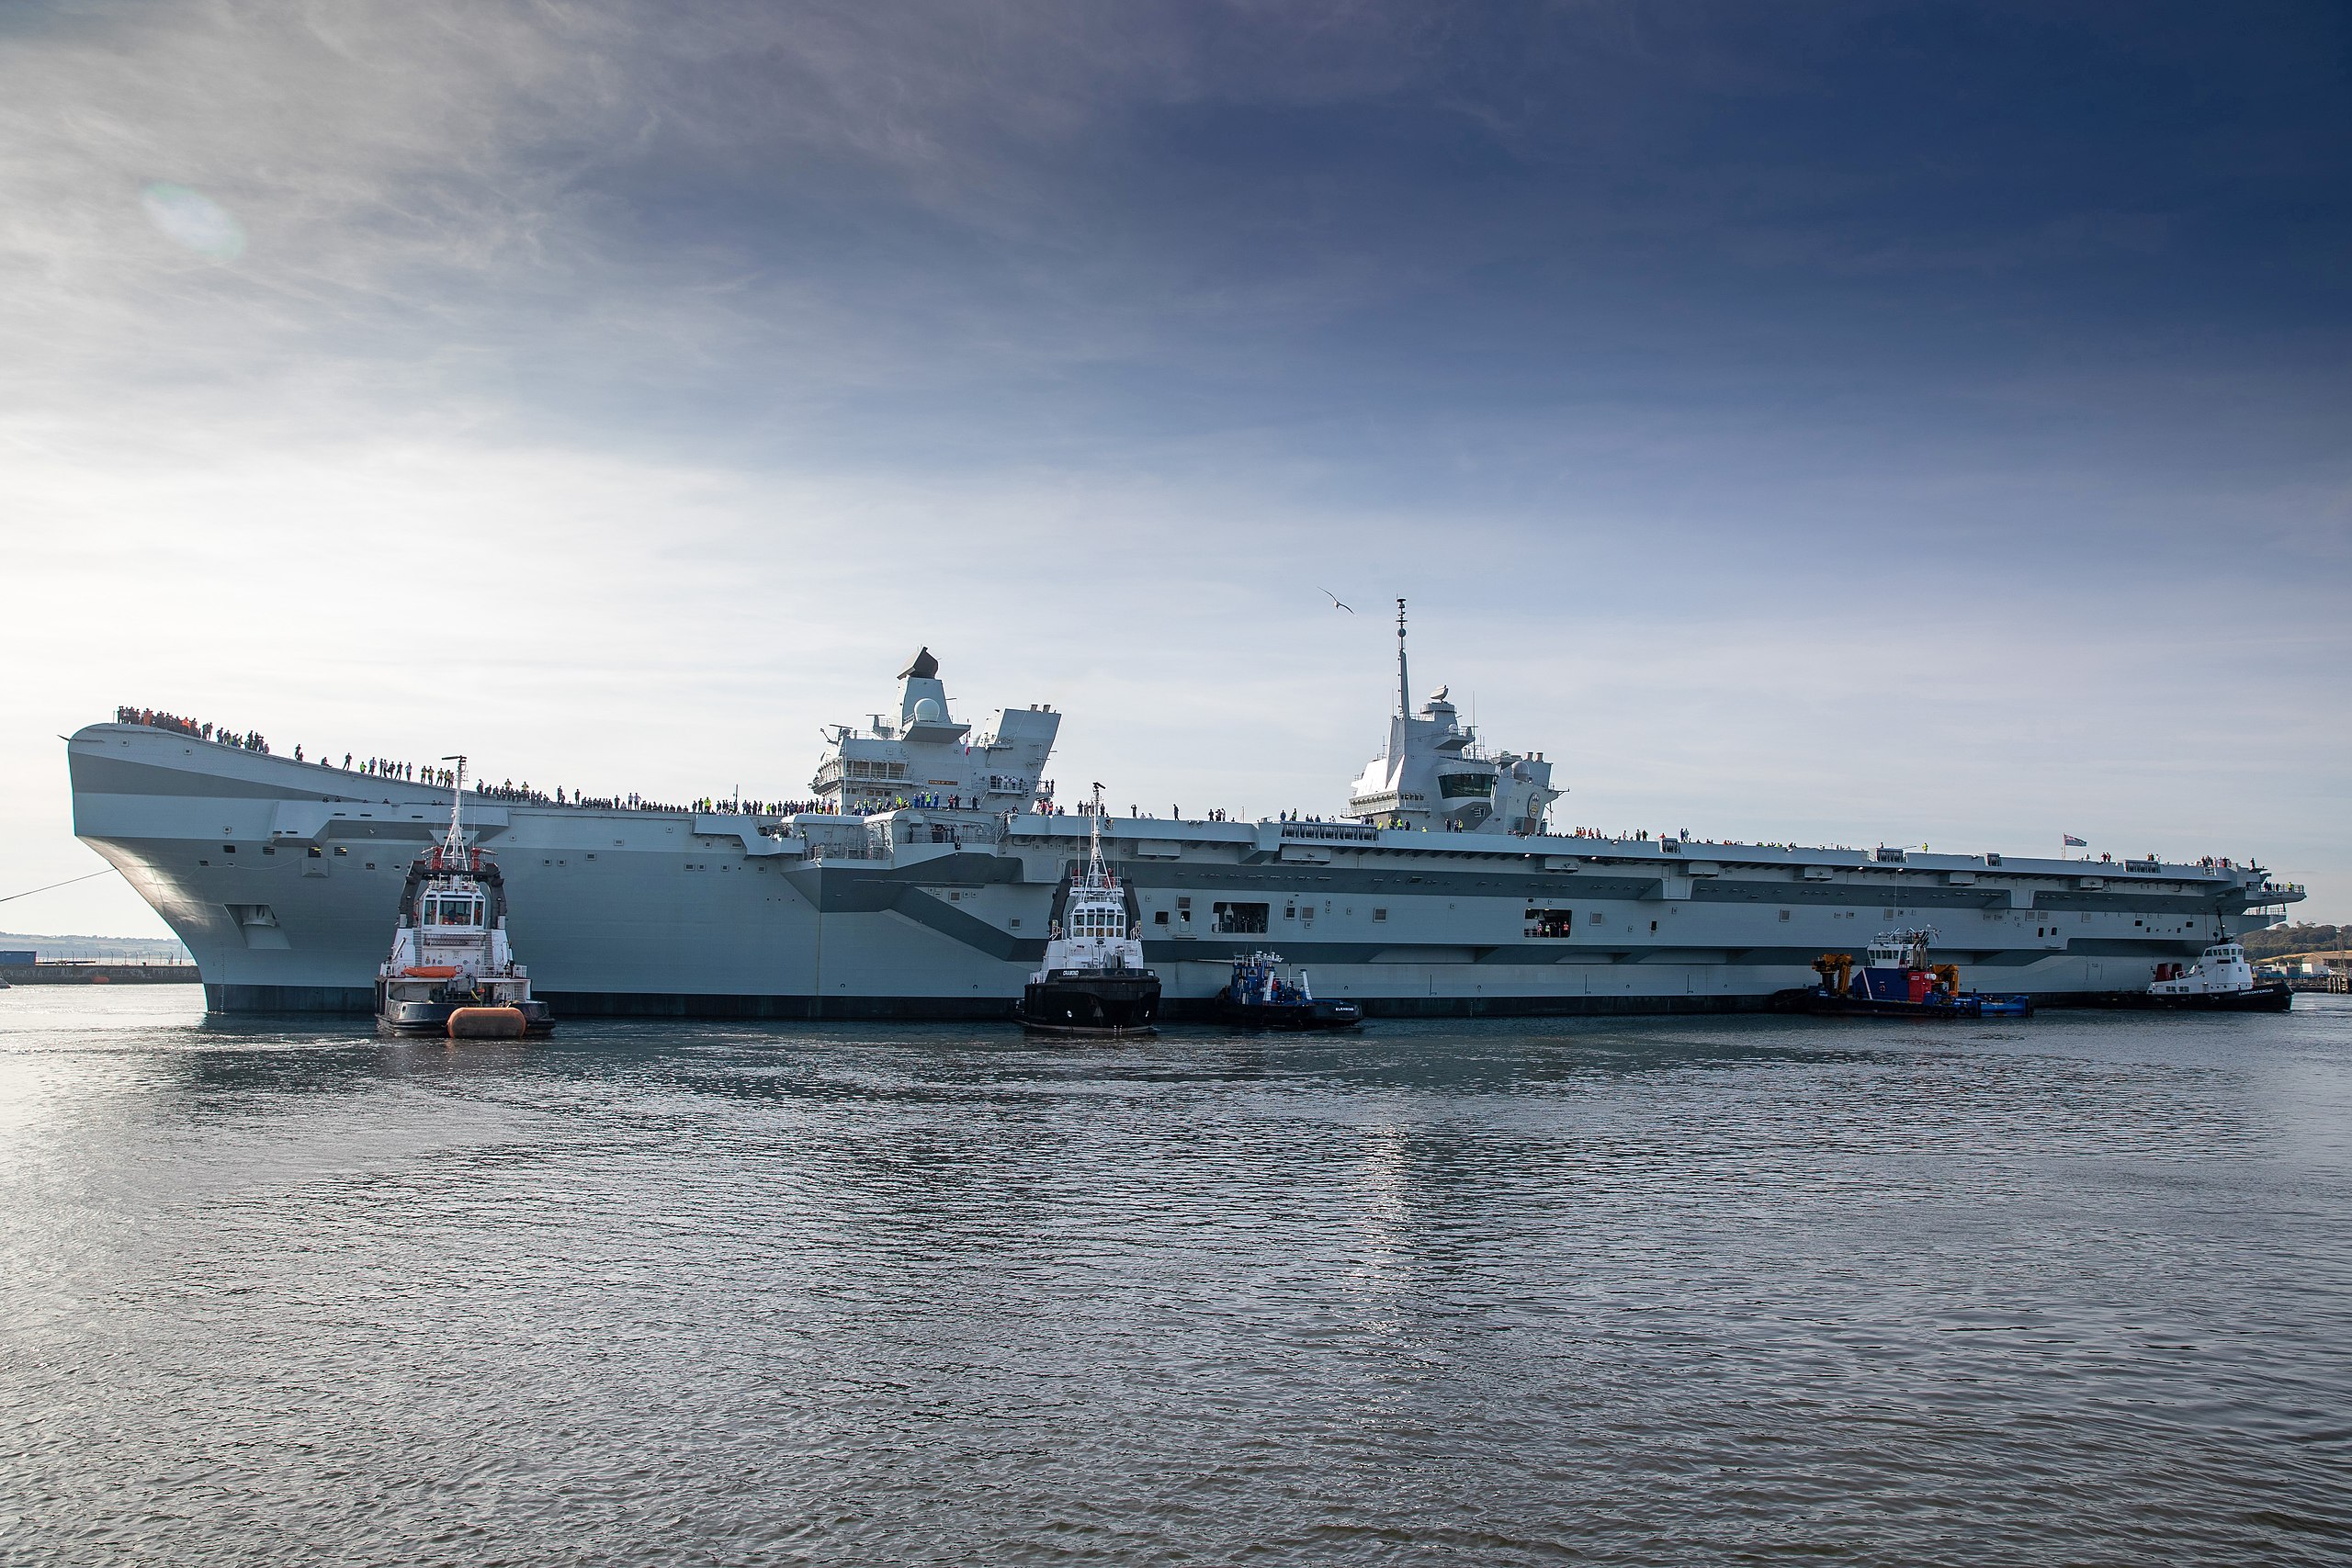 Britain's newest aircraft carrier HMS Prince of Wales, worth £3 billion, broke down hours after sailing from Portsmouth